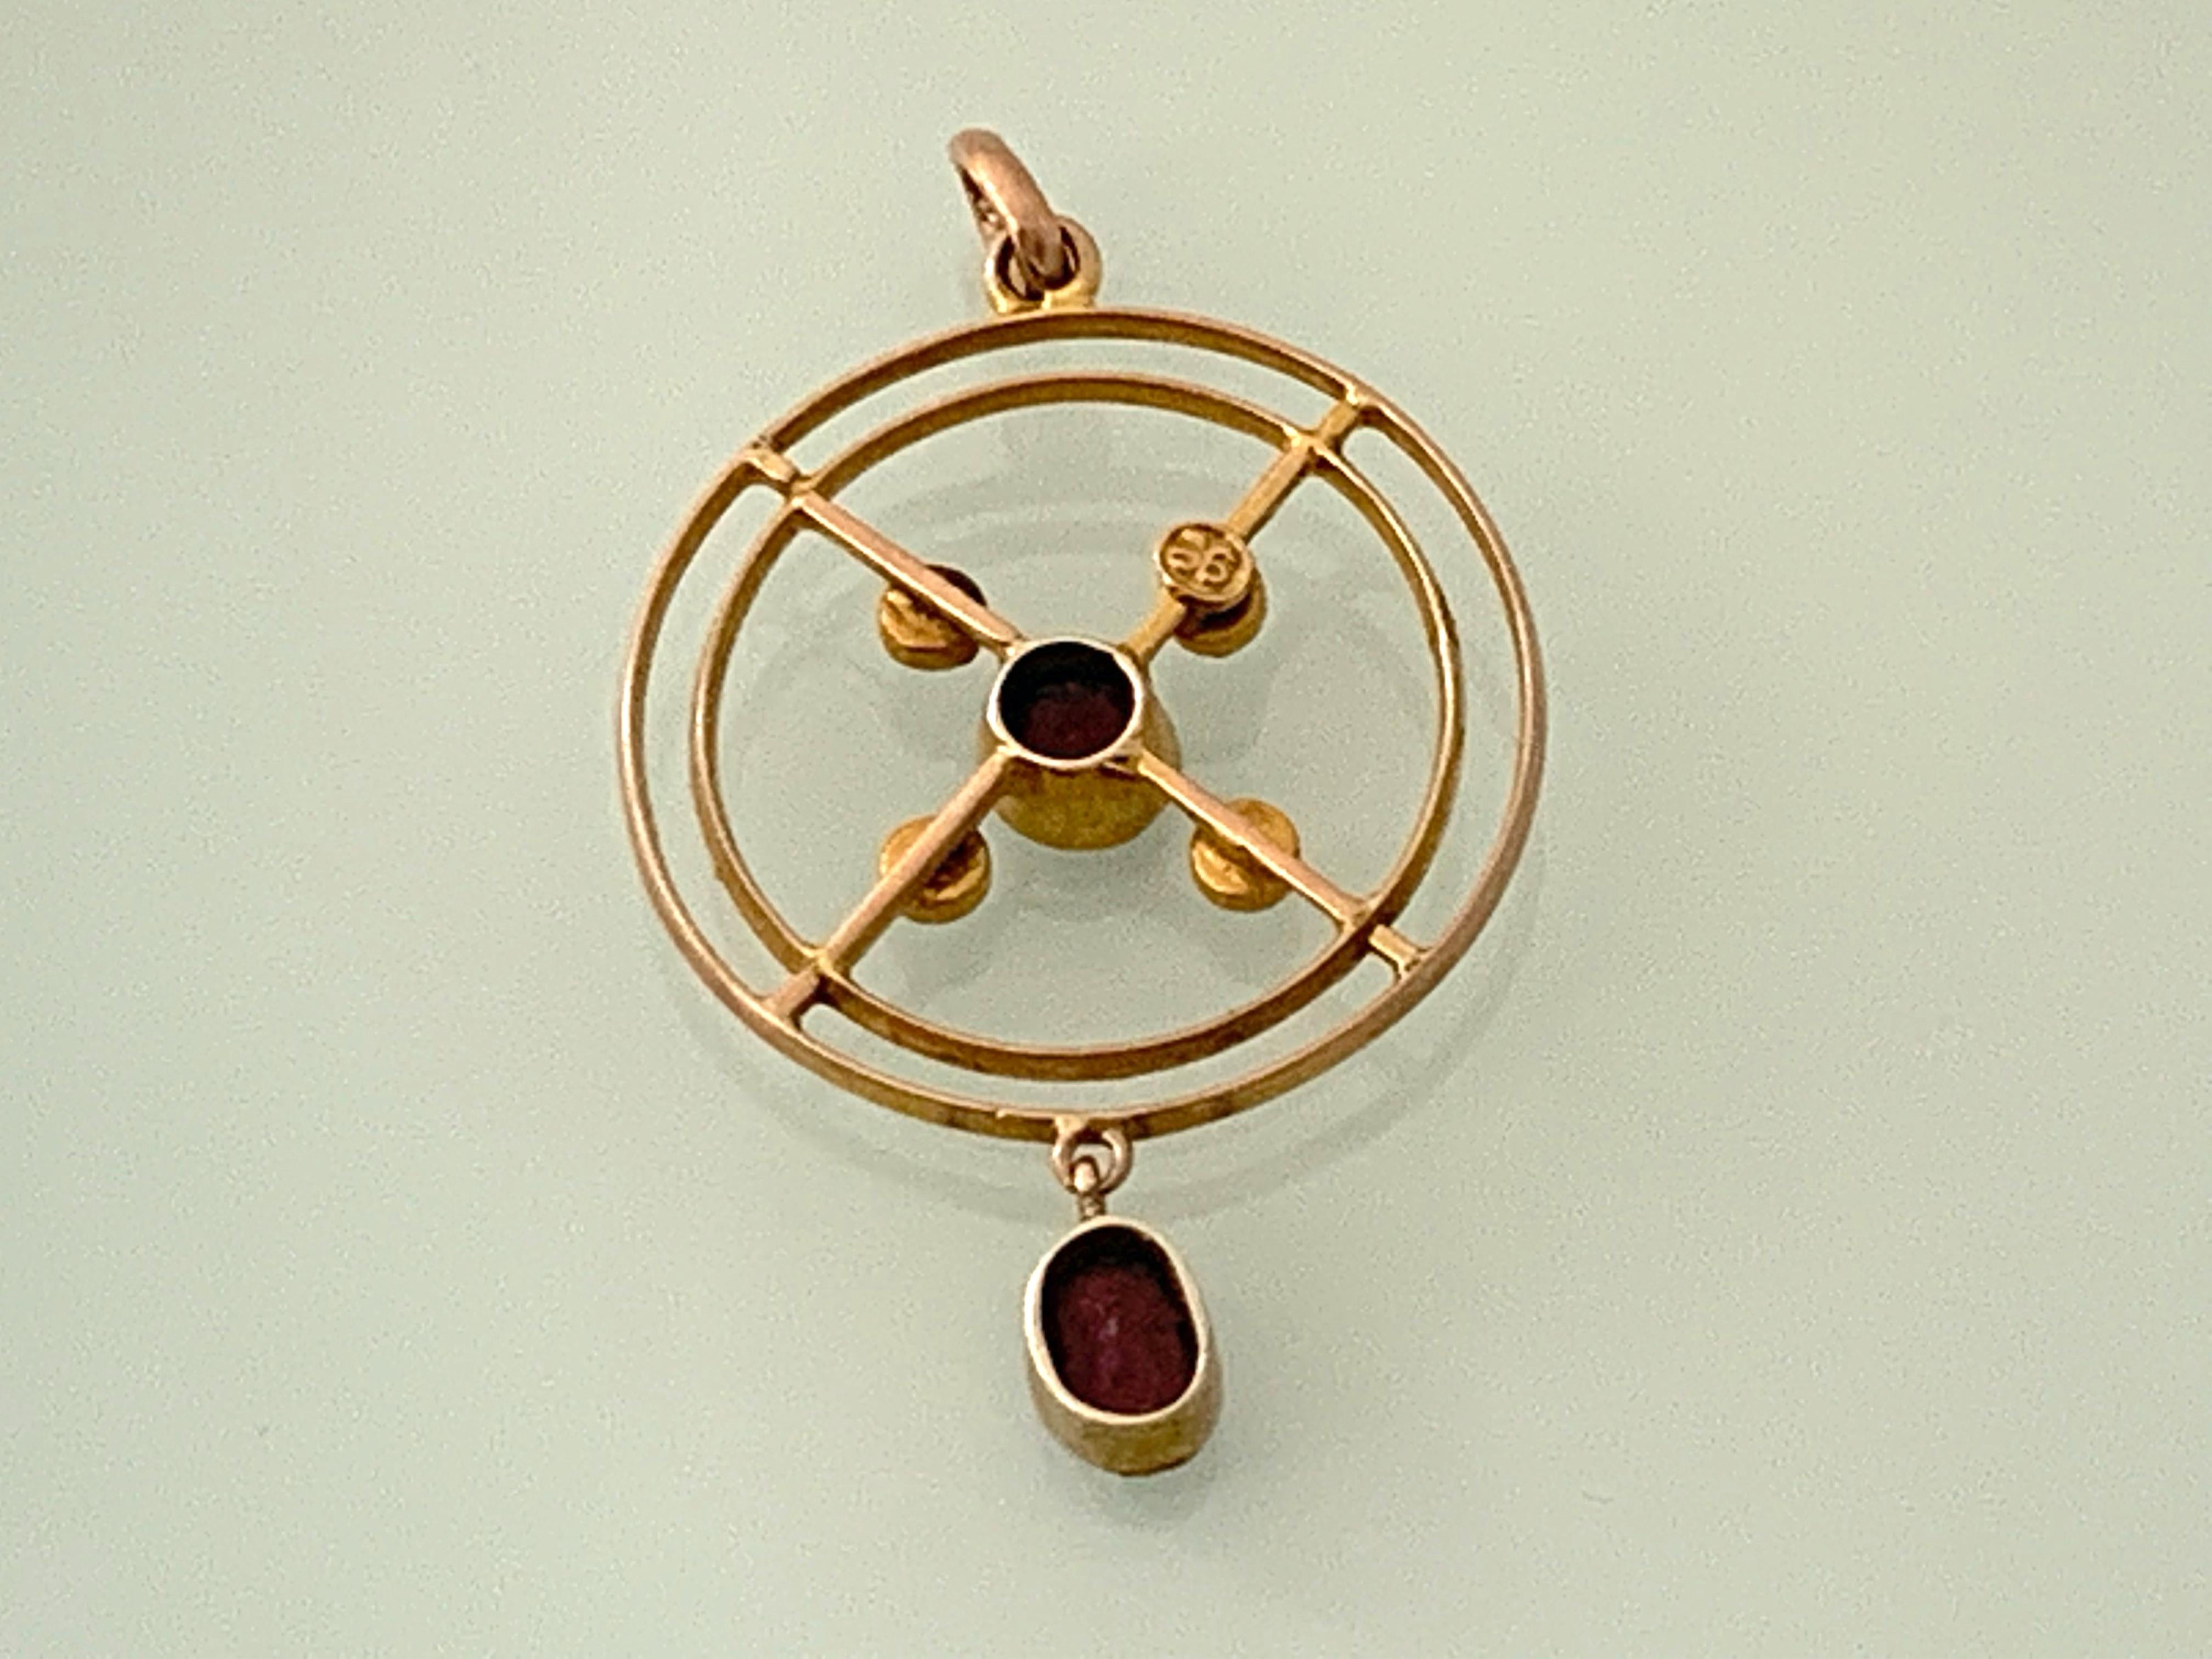 9ct Gold Art Deco Pendant
Geometric Design - displaying perfect symmetry
Two Faceted cut garnets adorn this design 
on eis oval and one is round 
the central one surrounded by four seed pearls 
Pendant has a closed bail 
and is stamped 9ct on